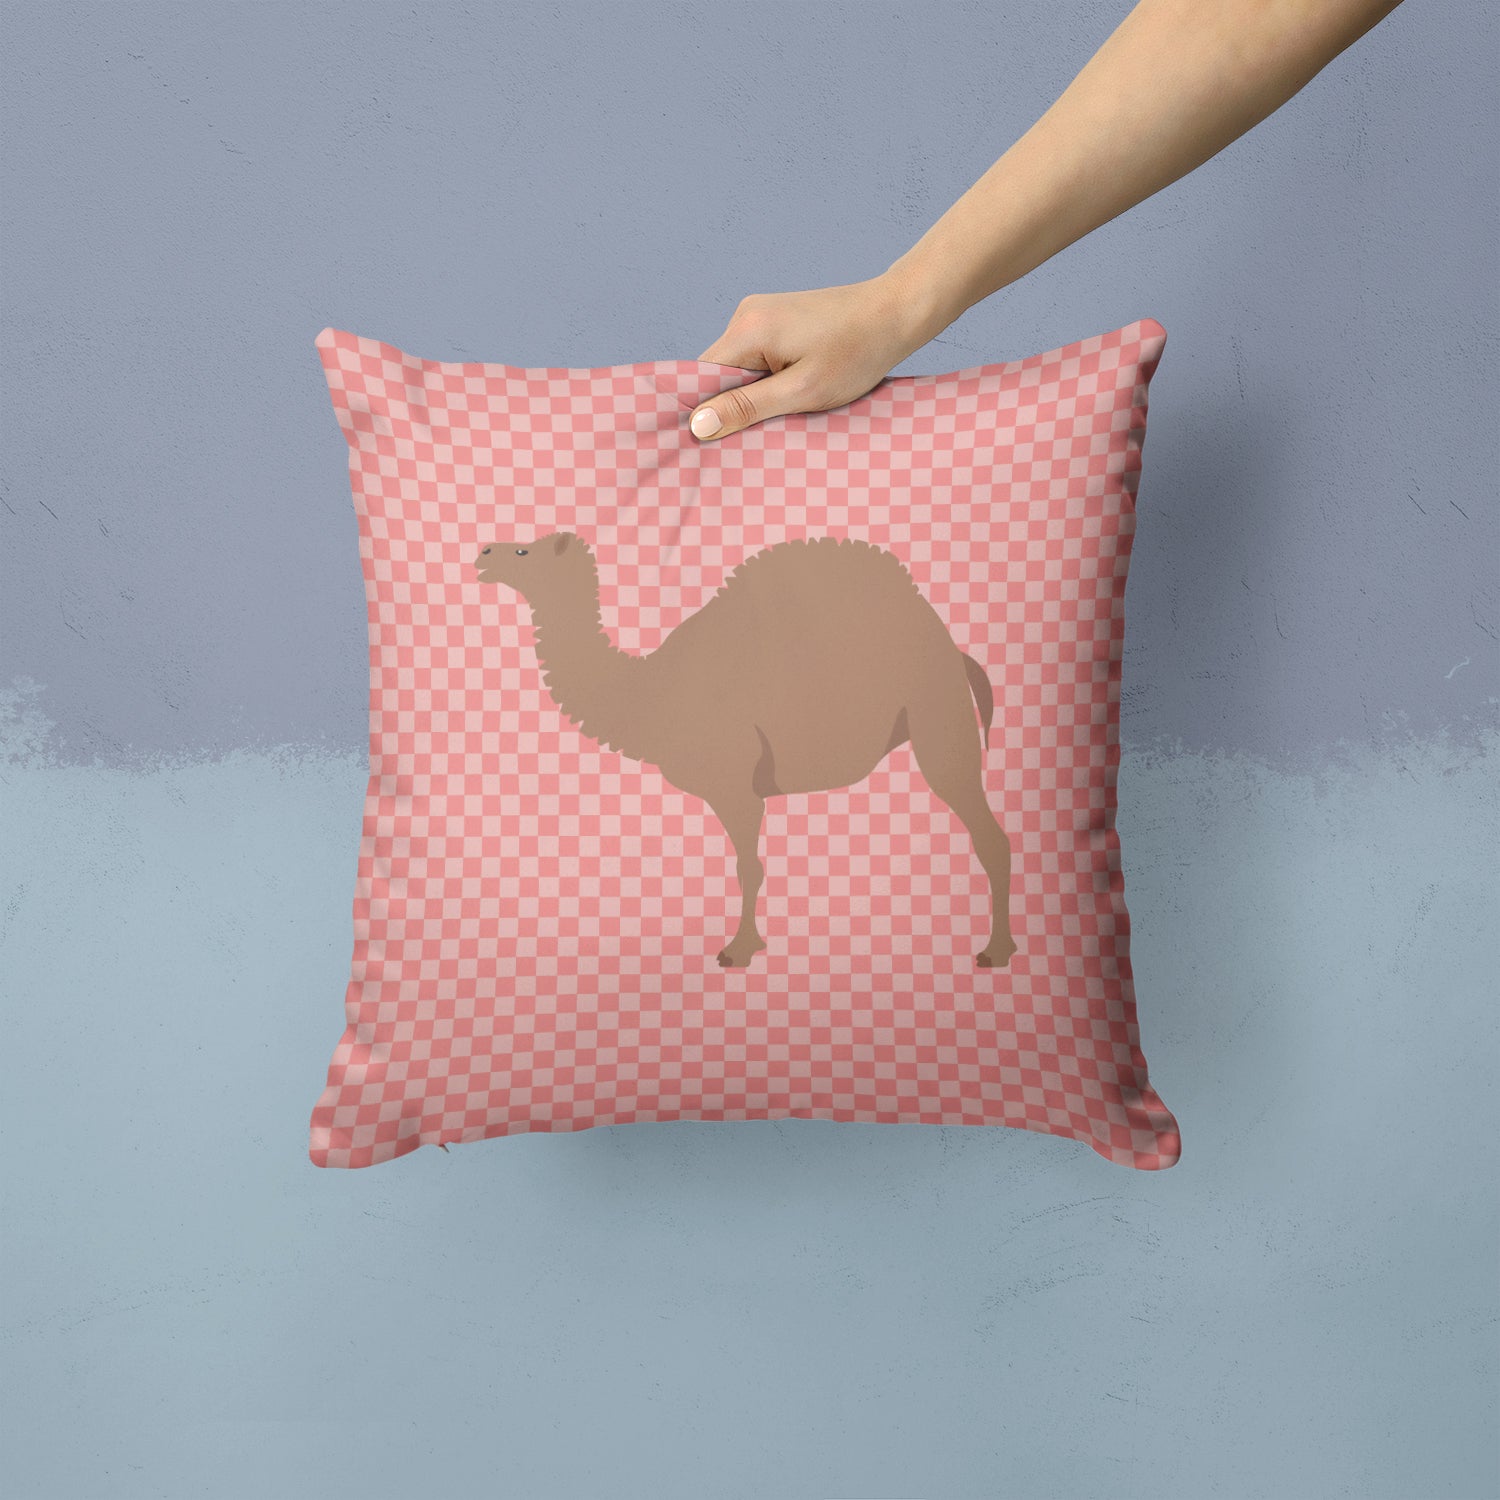 F1 Hybrid Camel Pink Check Fabric Decorative Pillow BB7819PW1414 - the-store.com